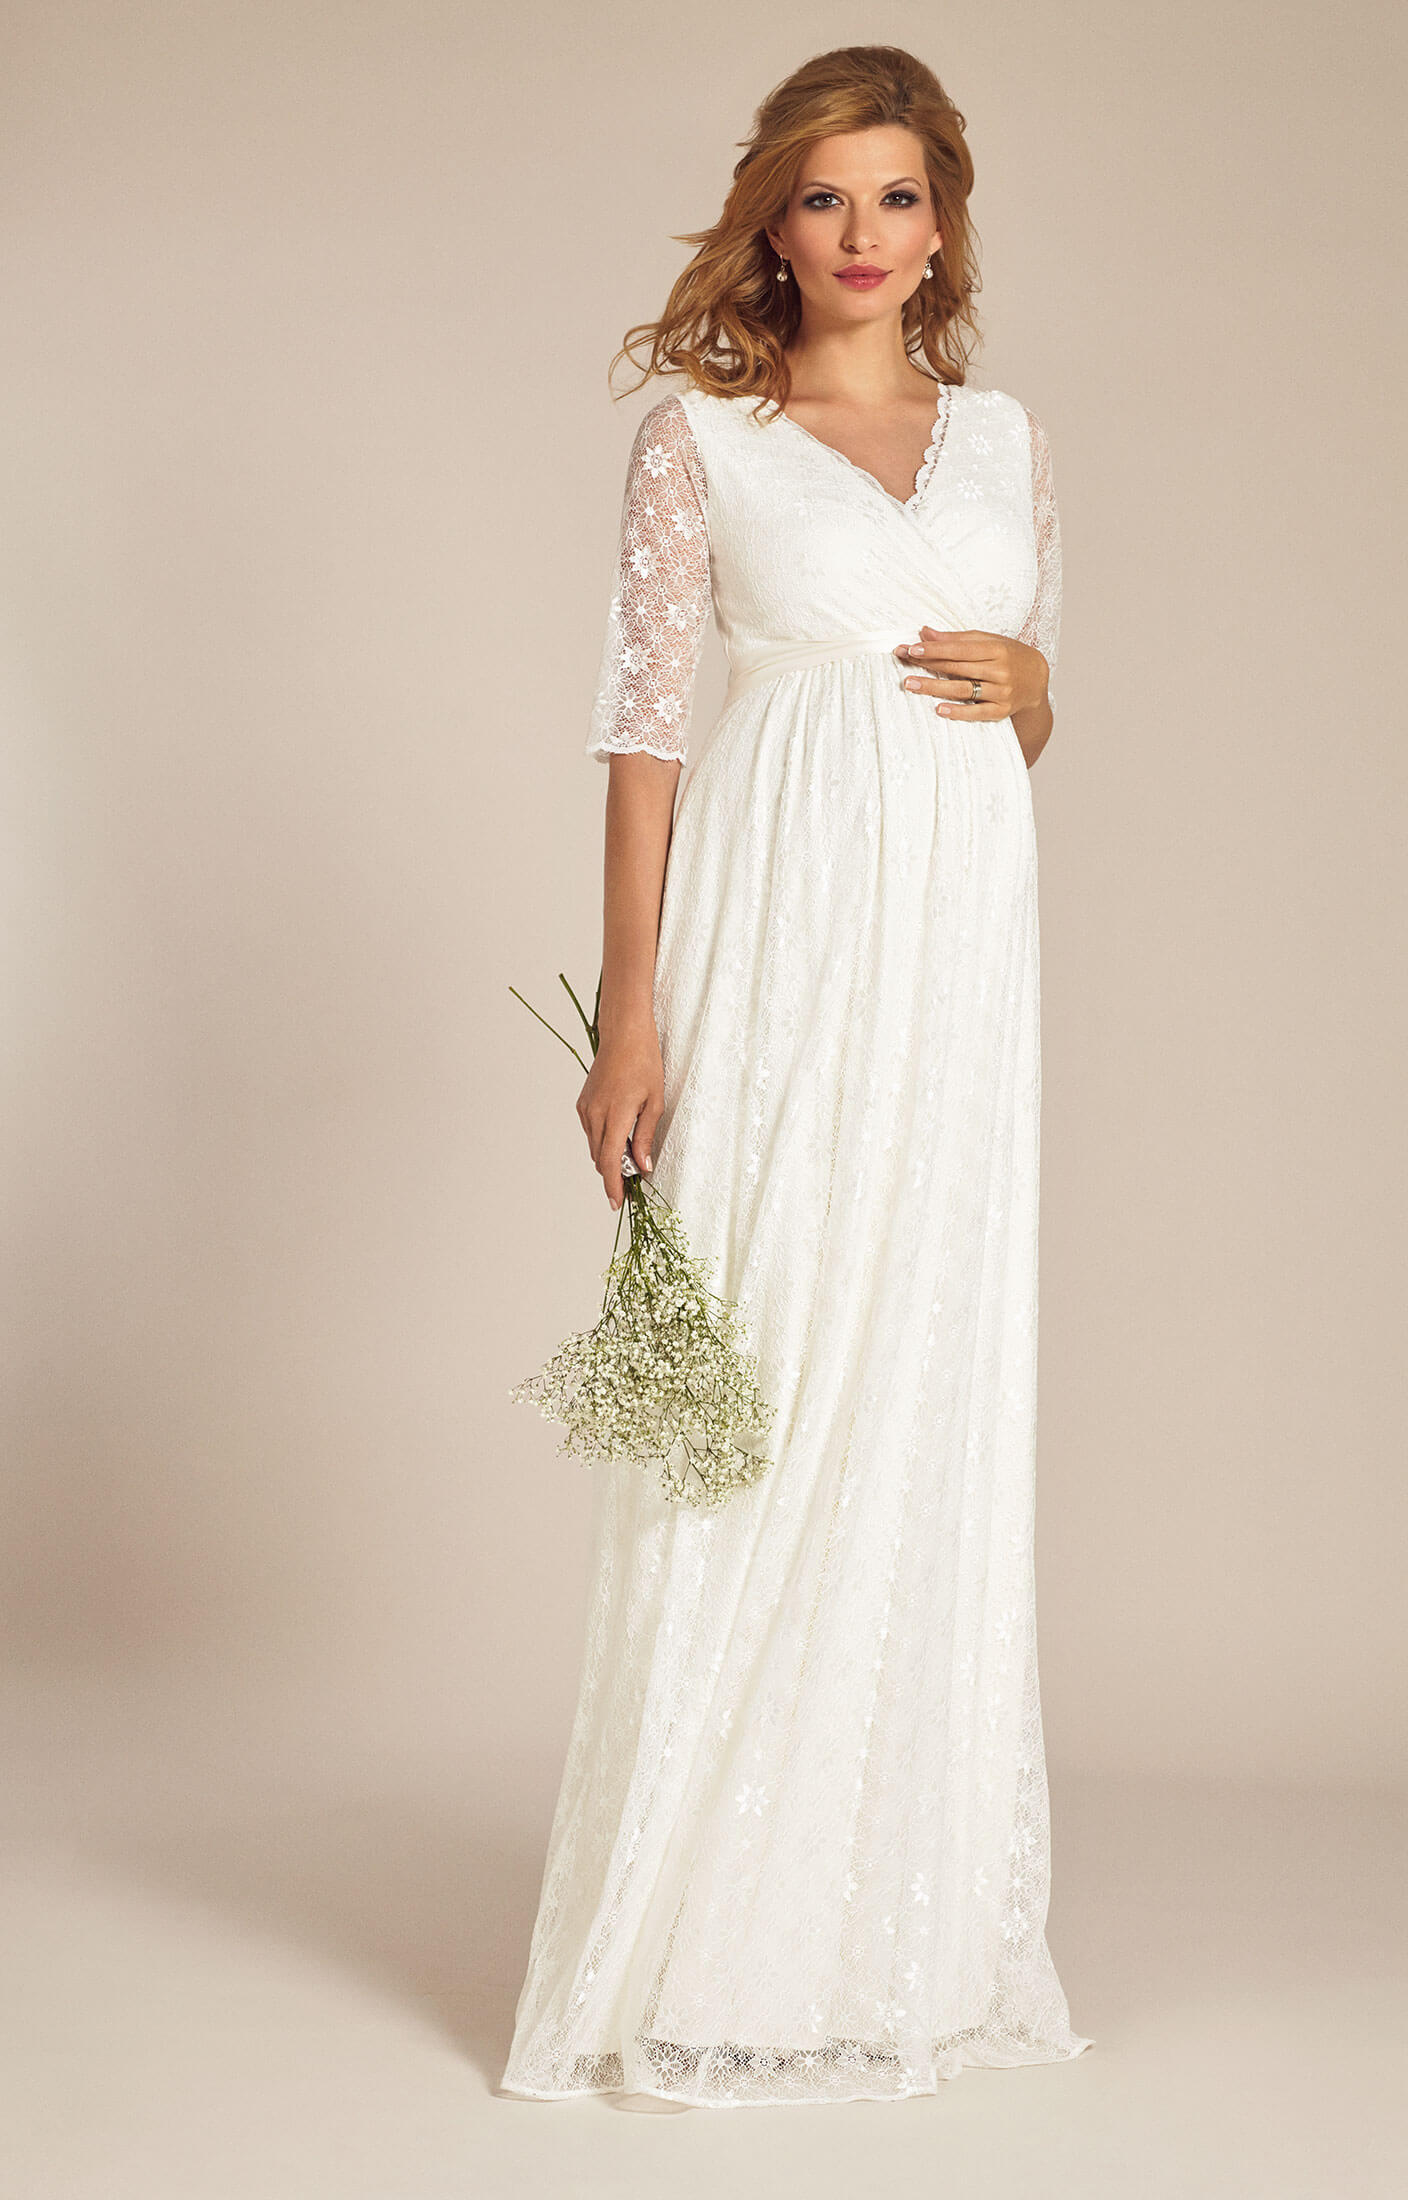 Edith Lace Maternity Kimono Dress in Ivory - Maternity Wedding Dresses,  Evening Wear and Party Clothes by Tiffany Rose CA